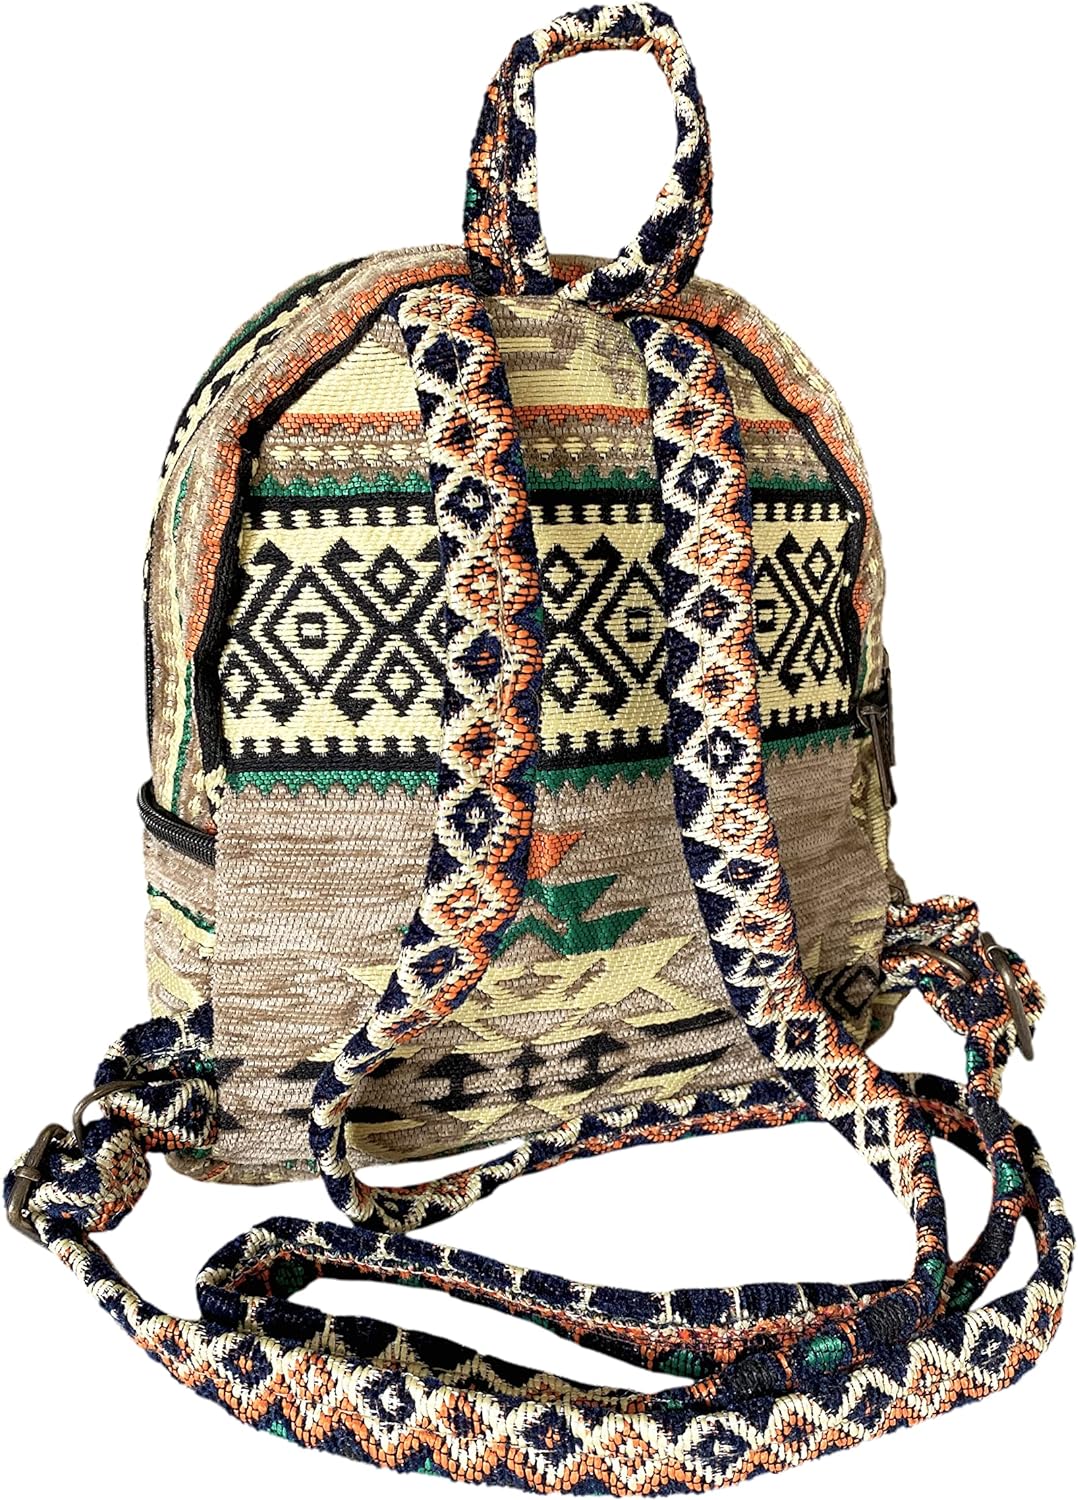 INDHA Denim Hand Embroidered Black Colour Backpack Bag for Girl's/Women's -  Curated online shop for handcrafted products made in India by women artisans